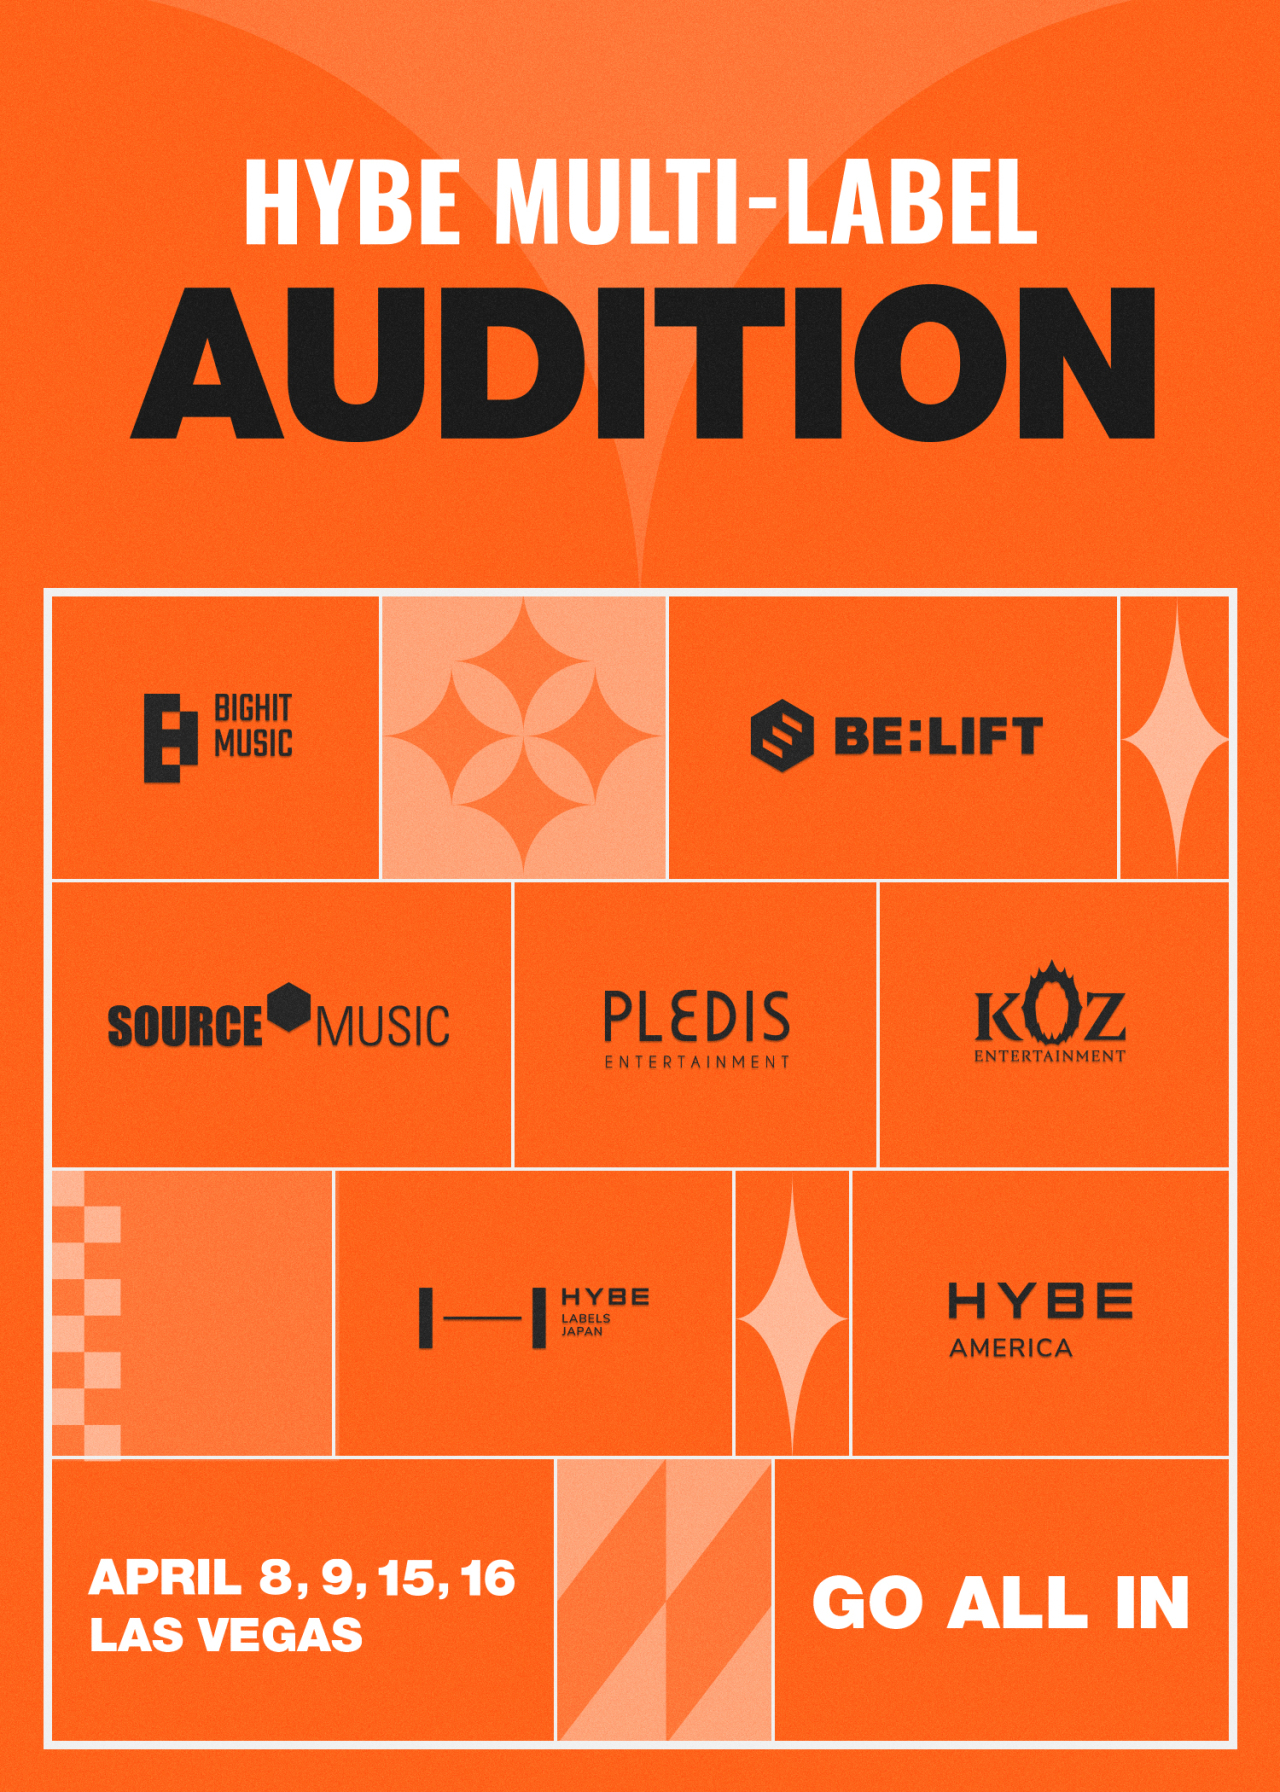 Poster image of “Hybe Multi-label Audition” (Hybe)